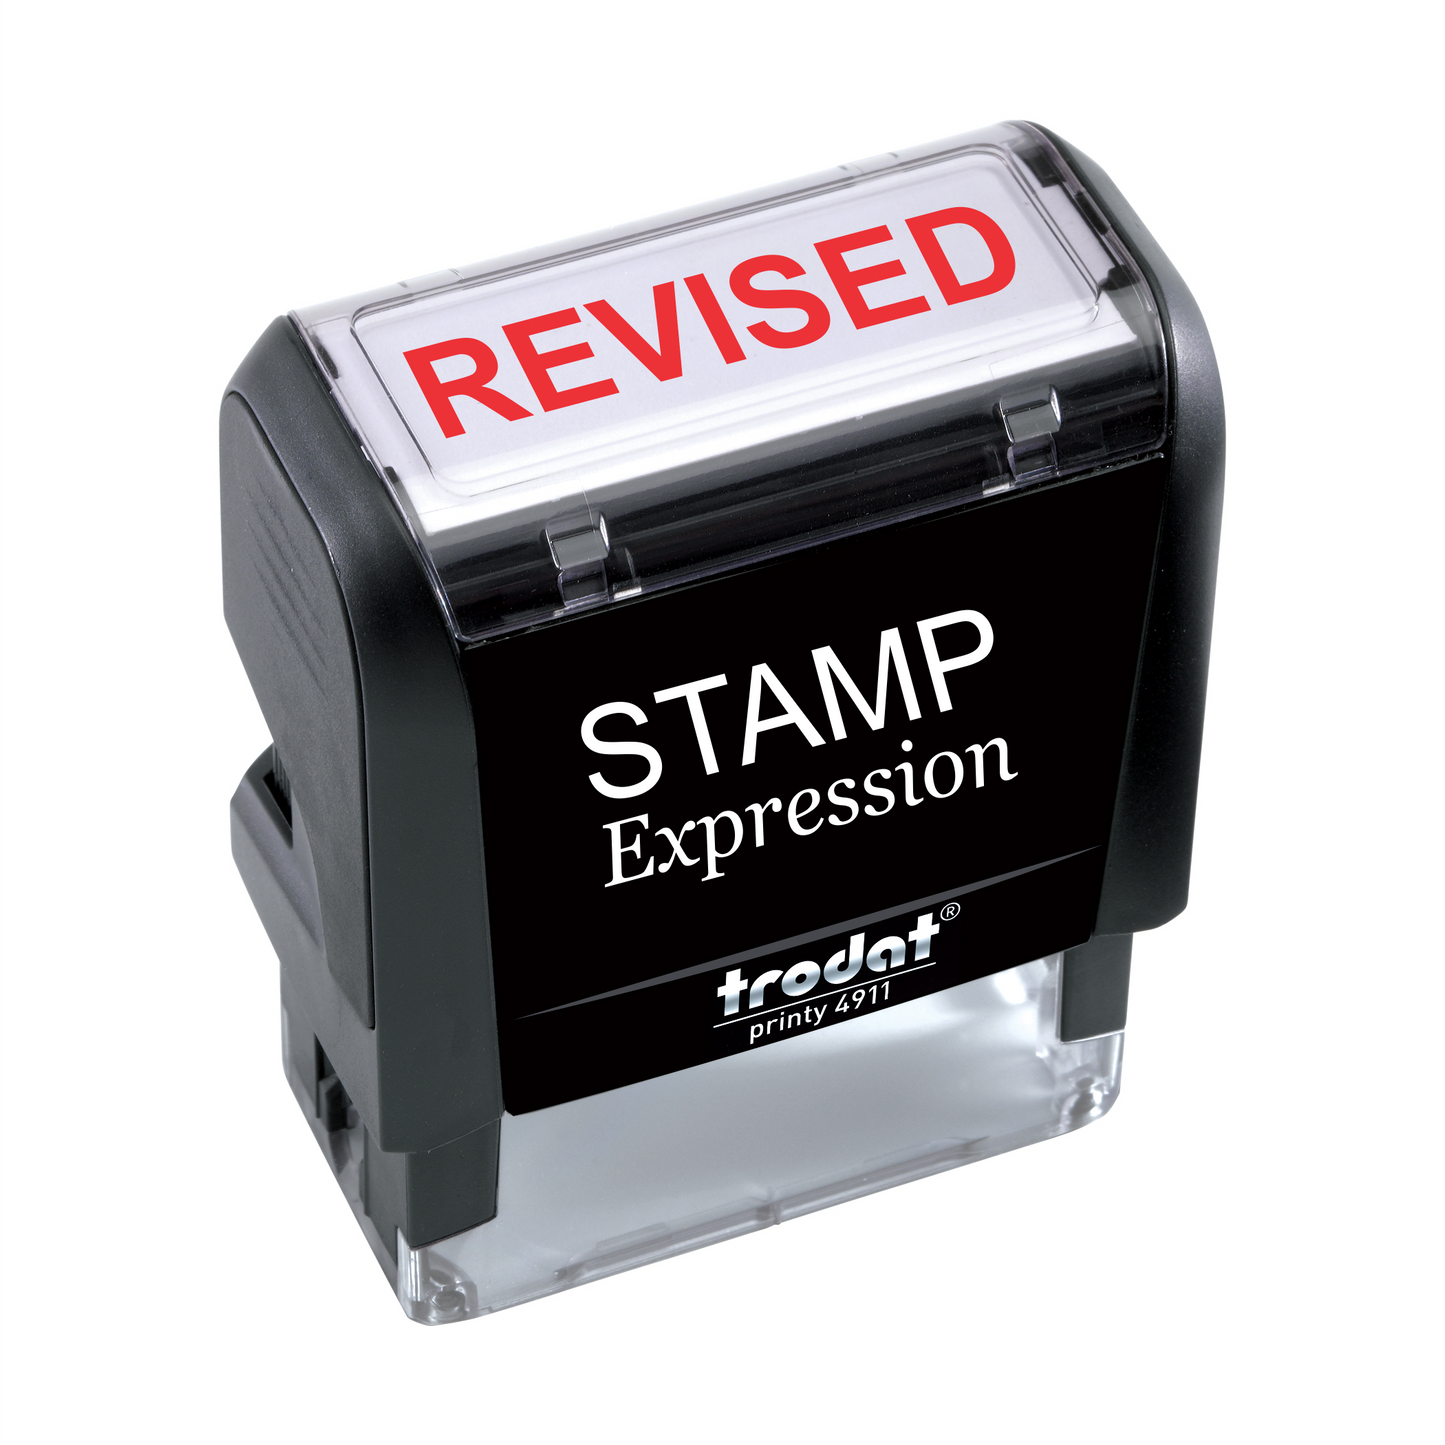 Revised Office Self Inking Rubber Stamp (SH-5048)